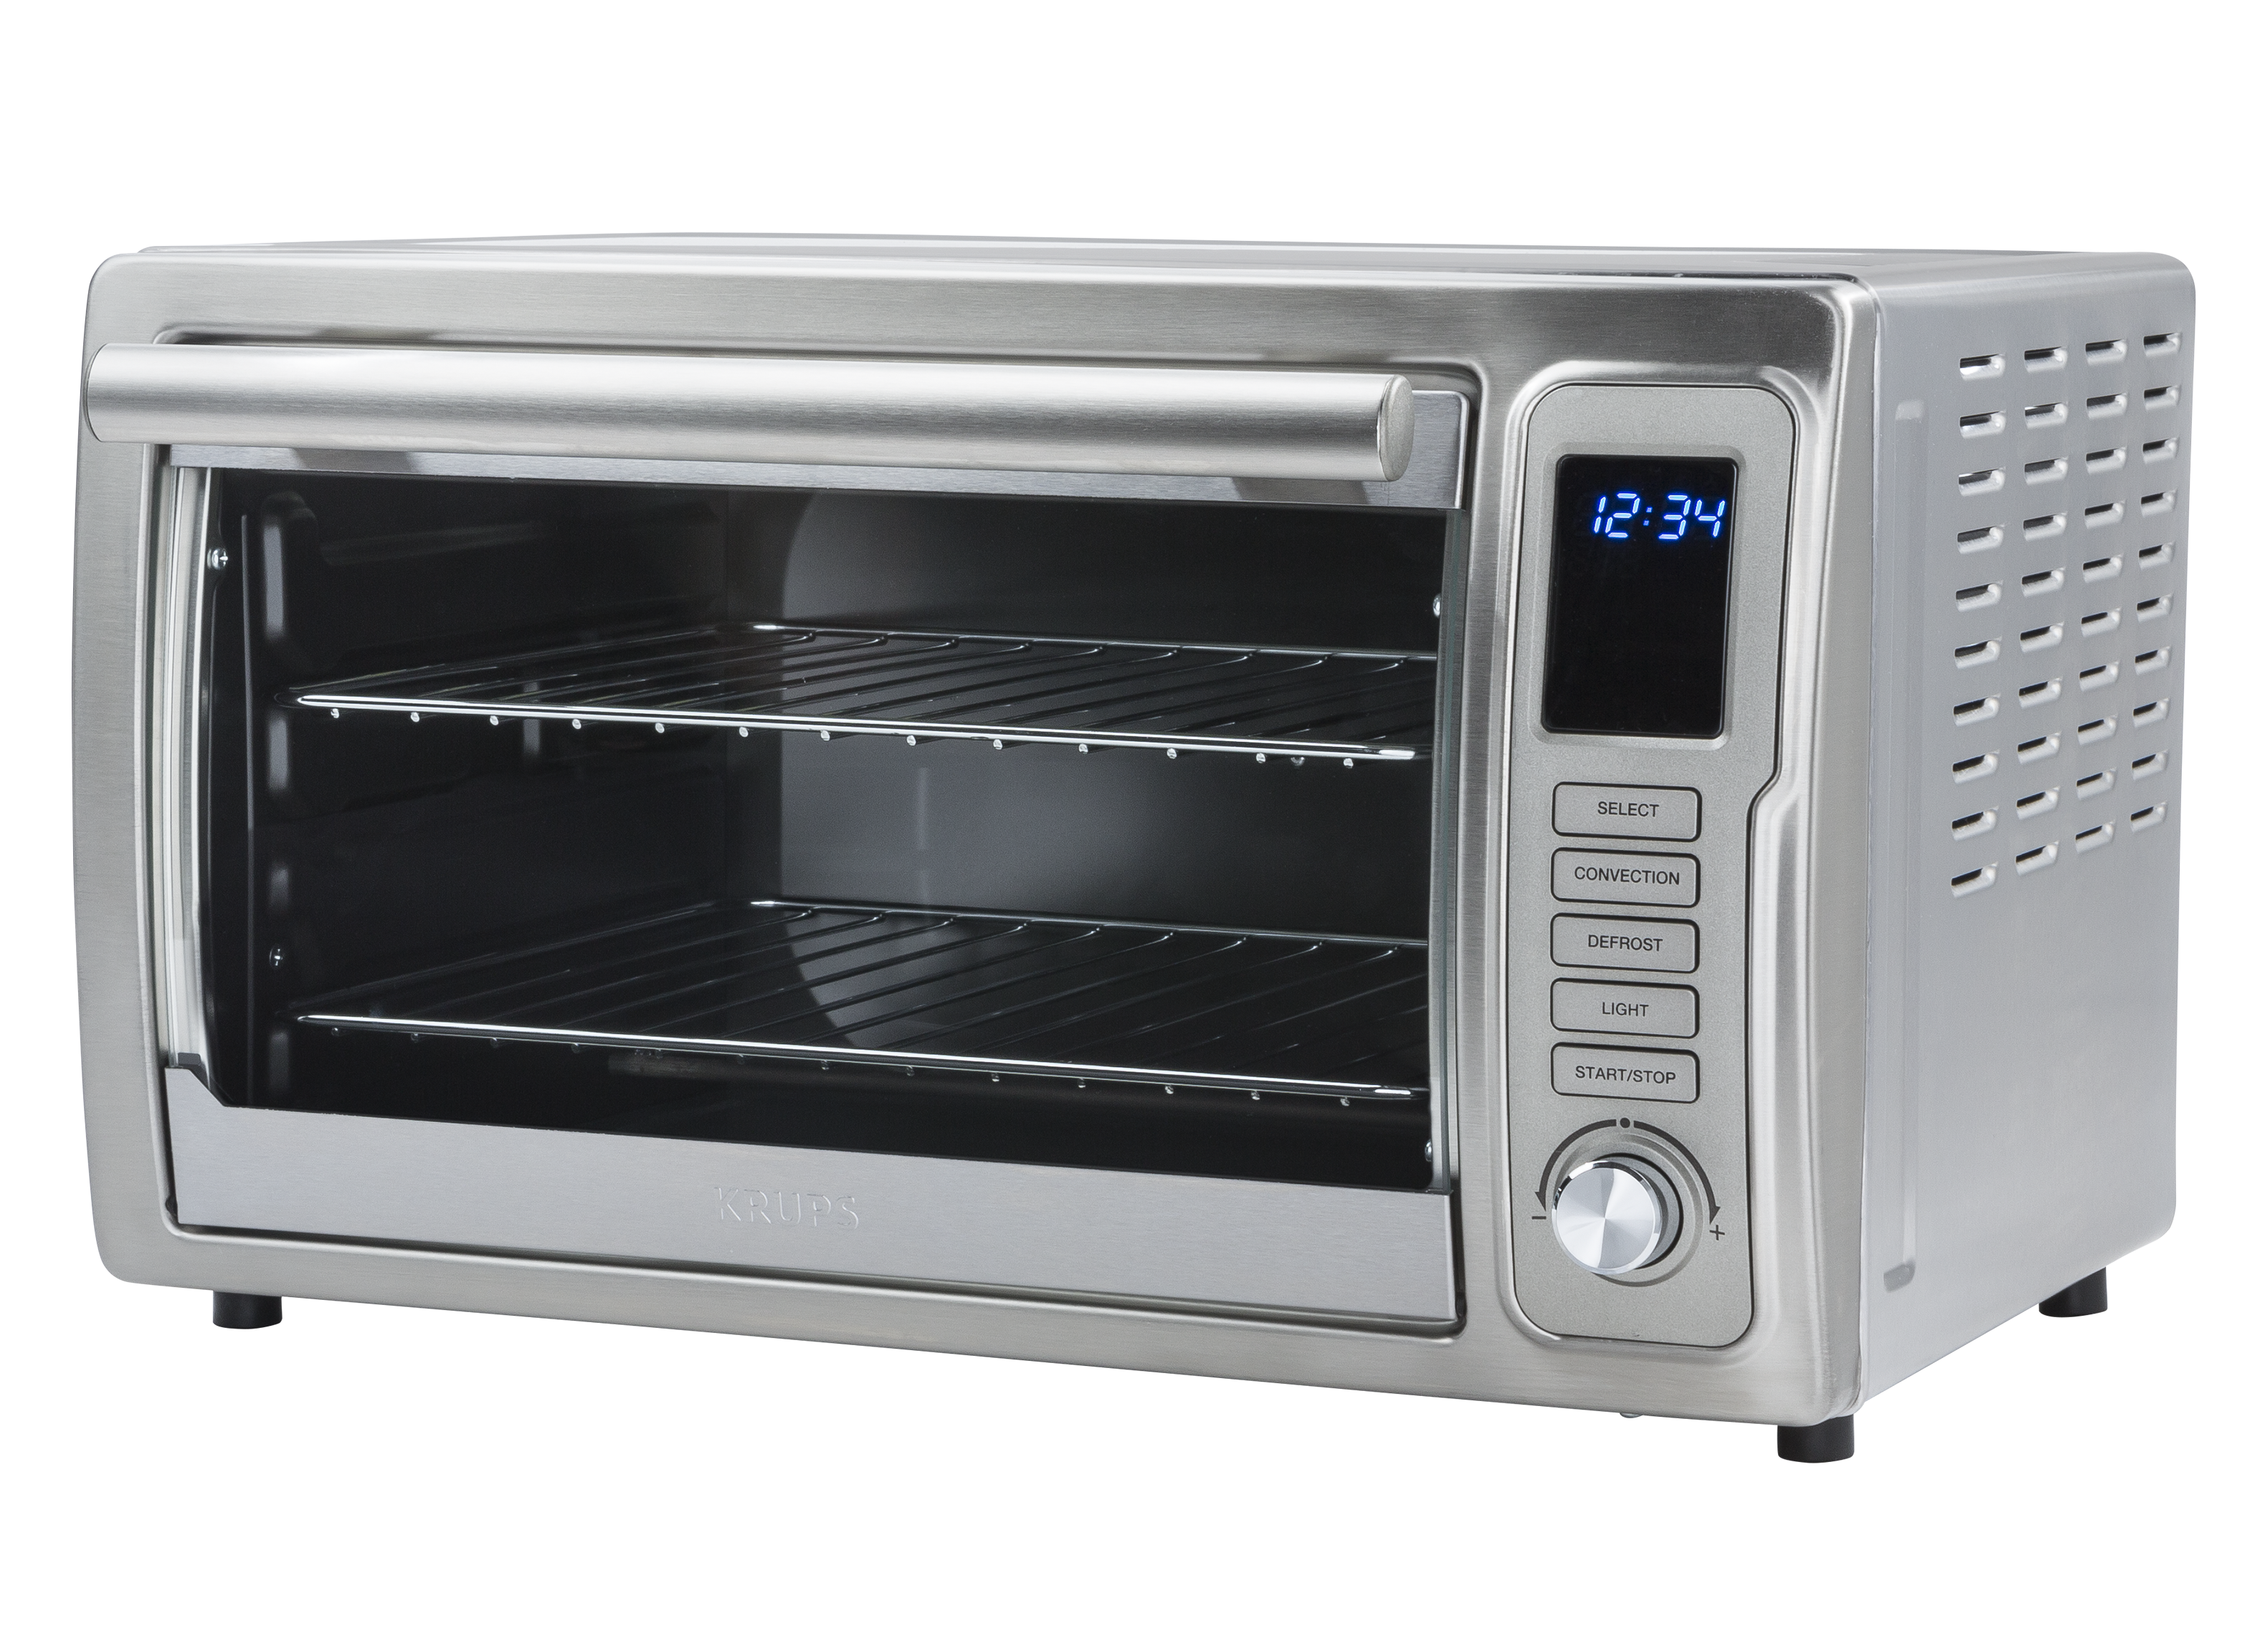 KRUPS 6 Slice Convection Toaster Oven with Digital Controls OK505D51  OK505D51